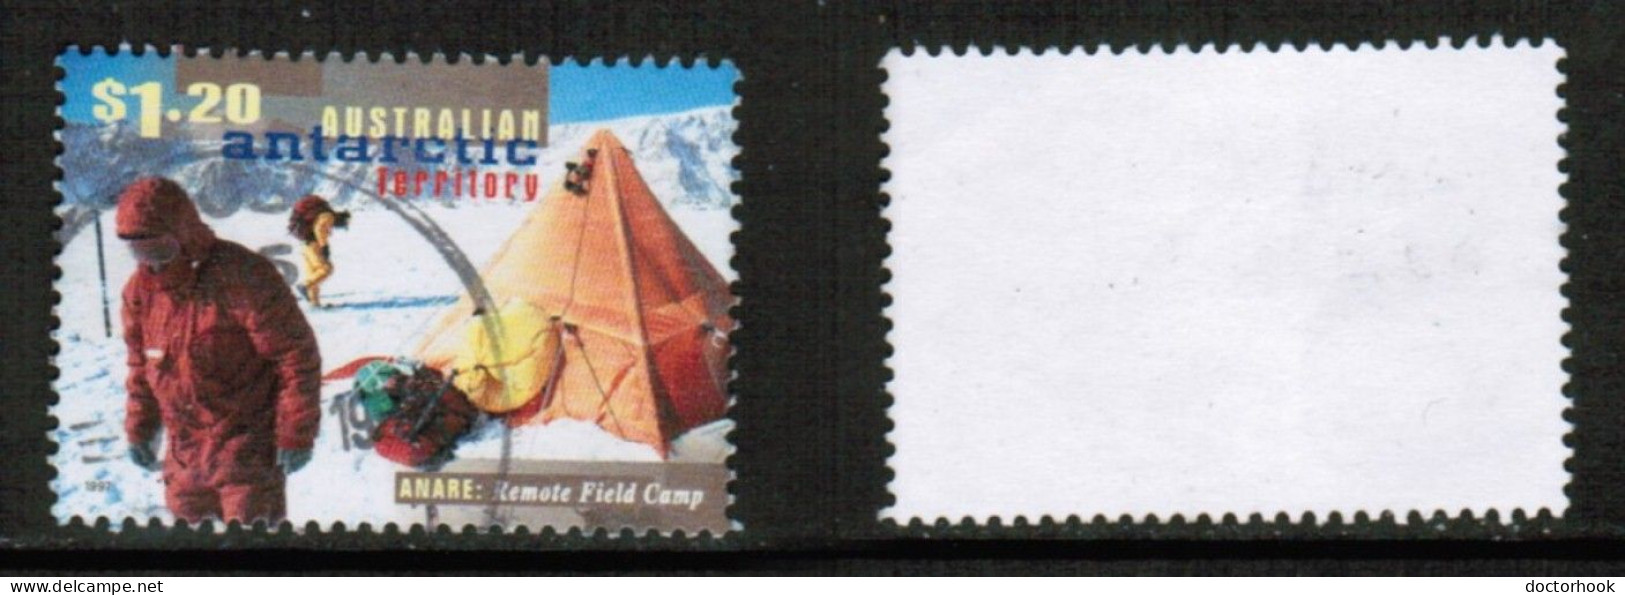 AUSTRALIAN ANTARCTIC TERRITORY   Scott # L 106 USED (CONDITION AS PER SCAN) (Stamp Scan # 930-4) - Usados